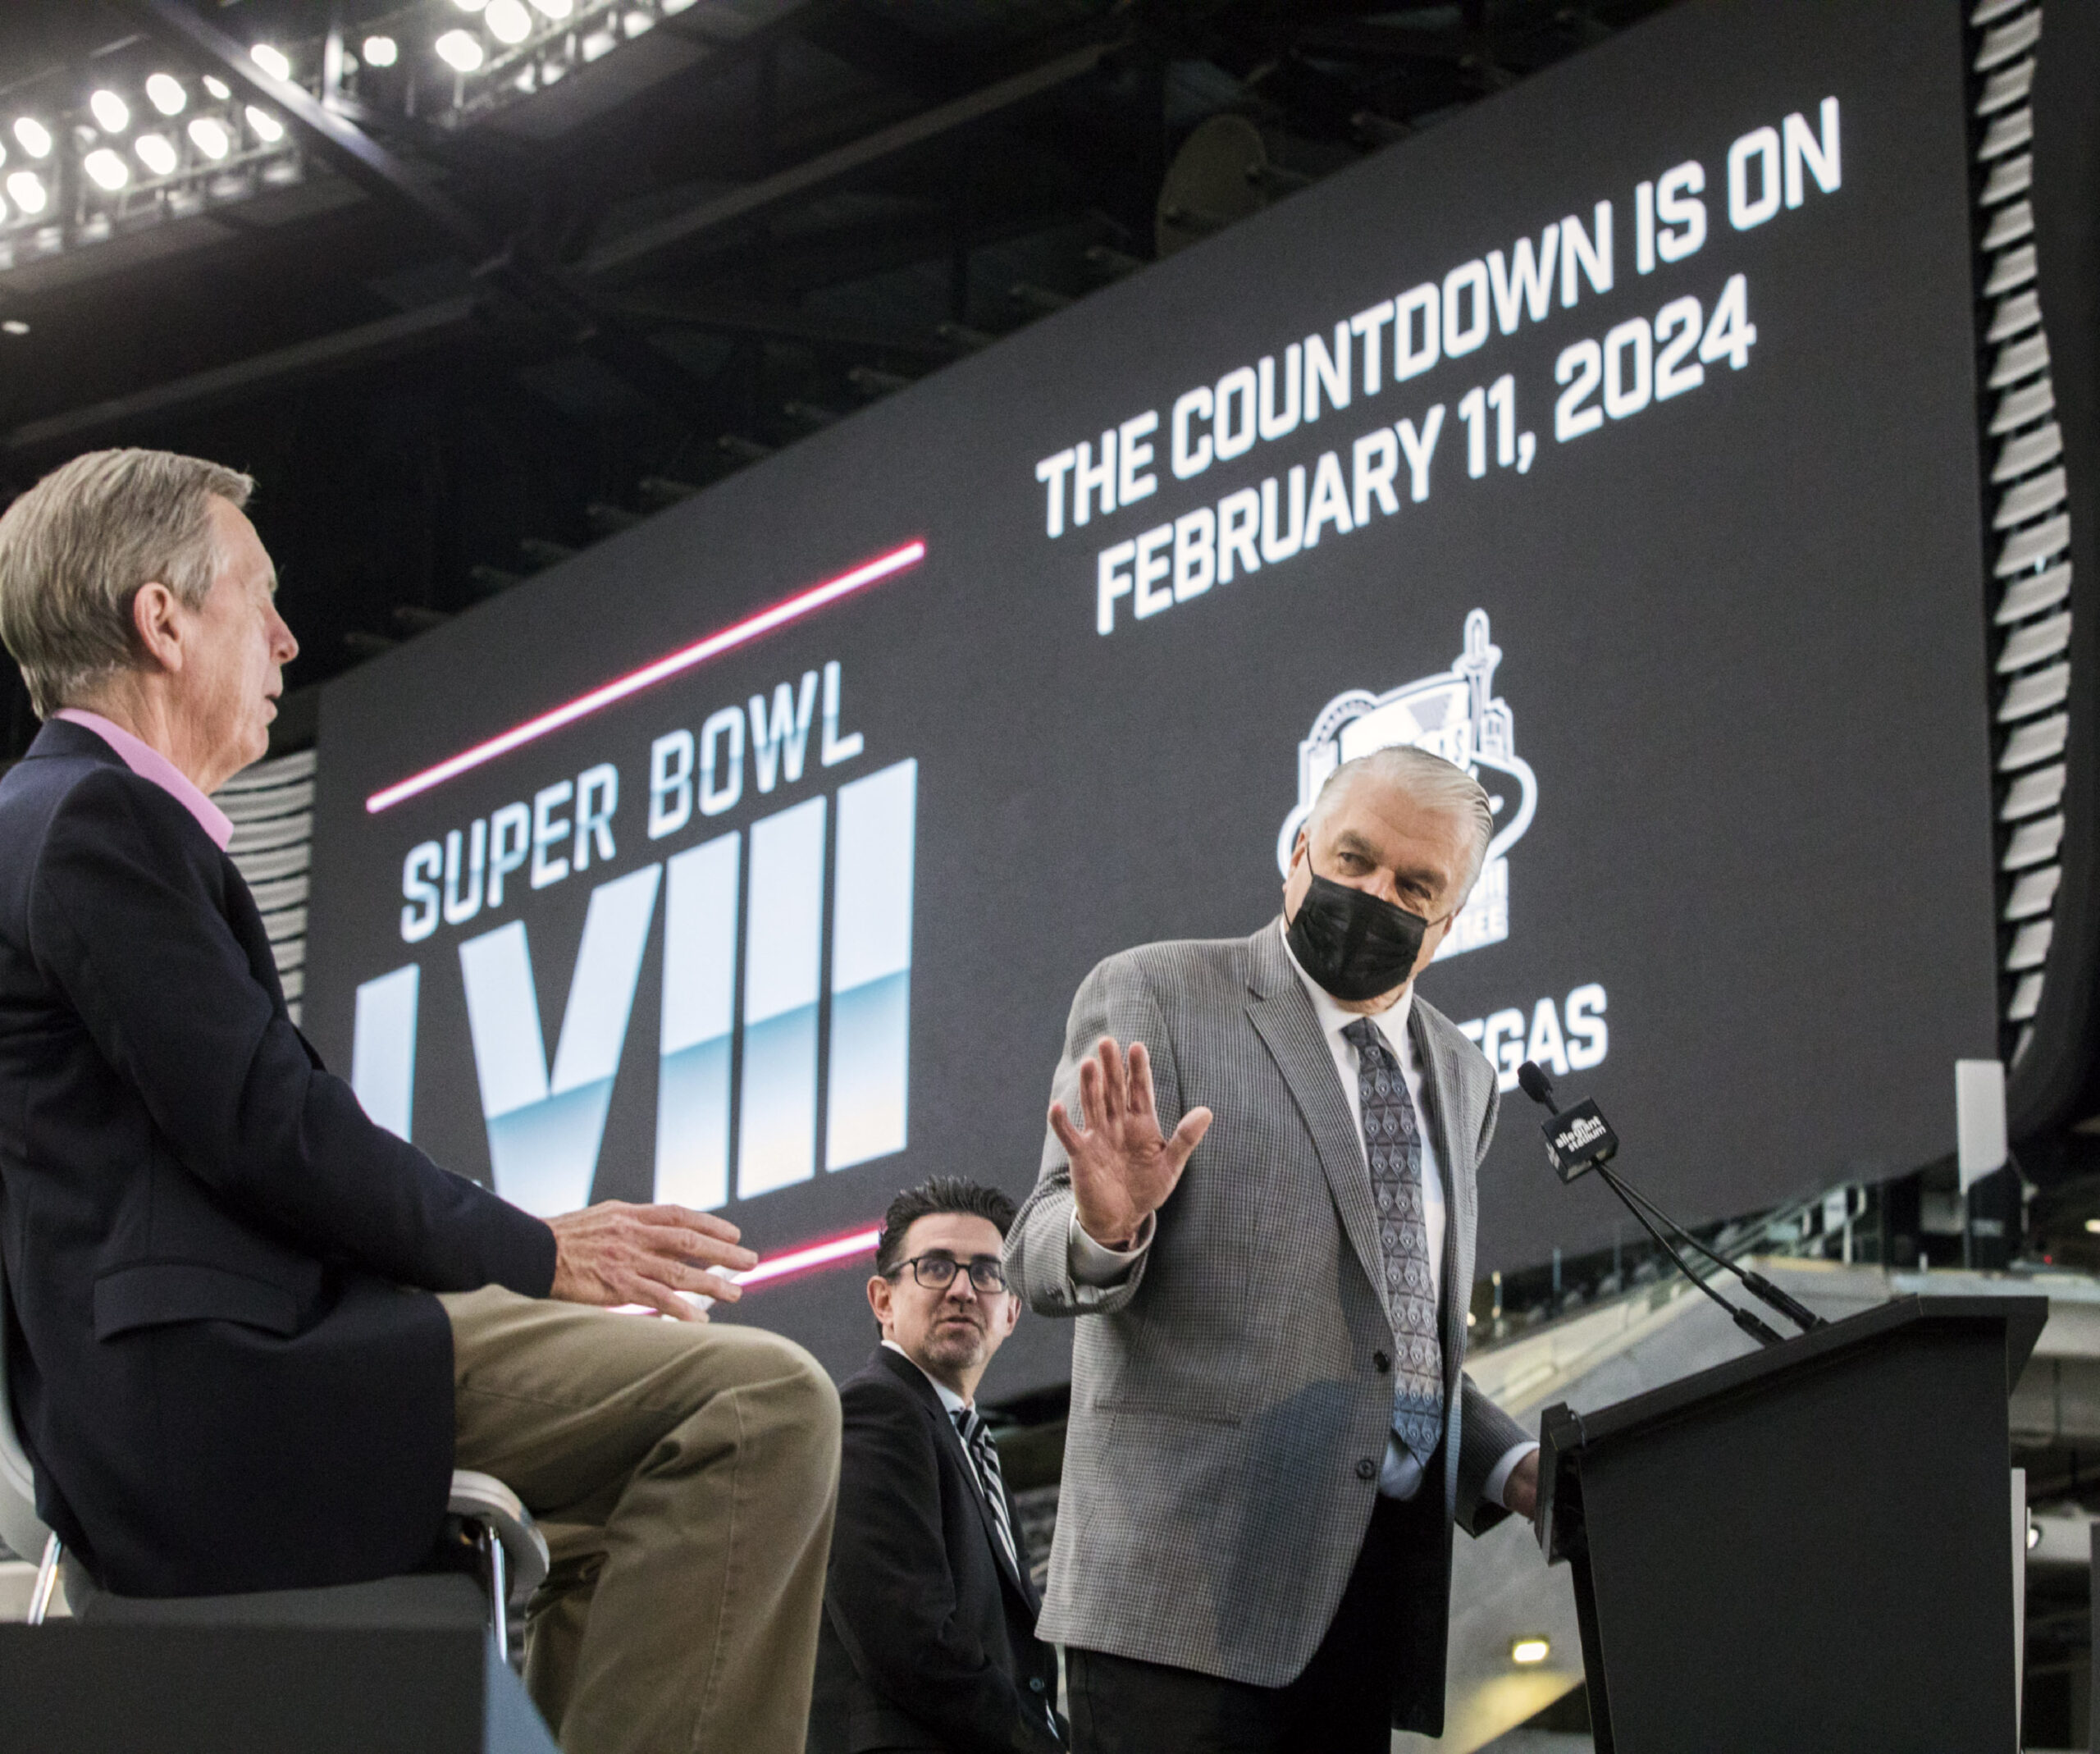 Countdown begins for Las Vegas to host Super Bowl in 2024